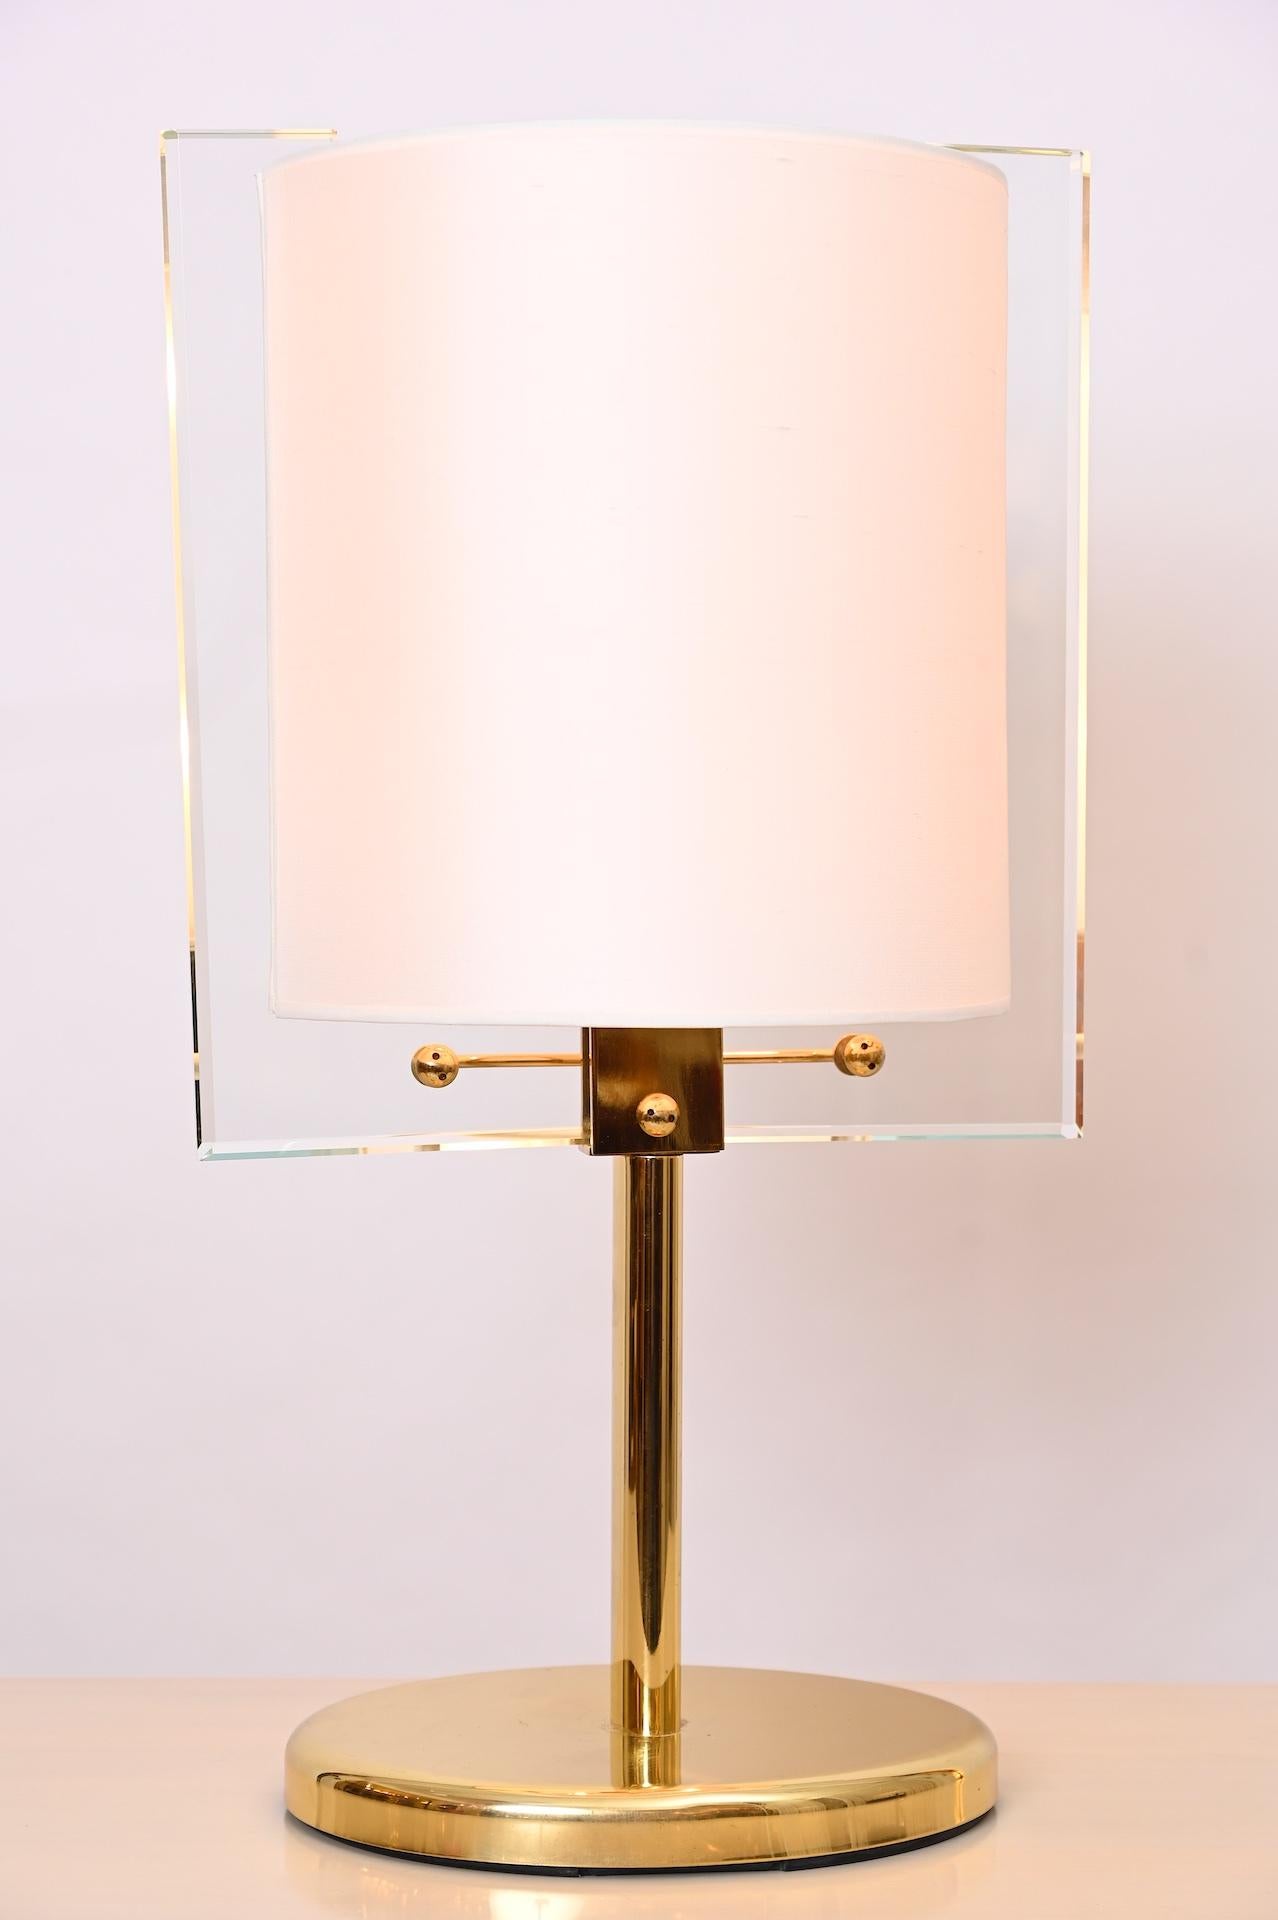 Late 20th century Fontana Arte table lamp, circa 1990 by Nathalie Grennon

Silk fabric shade has been remade.